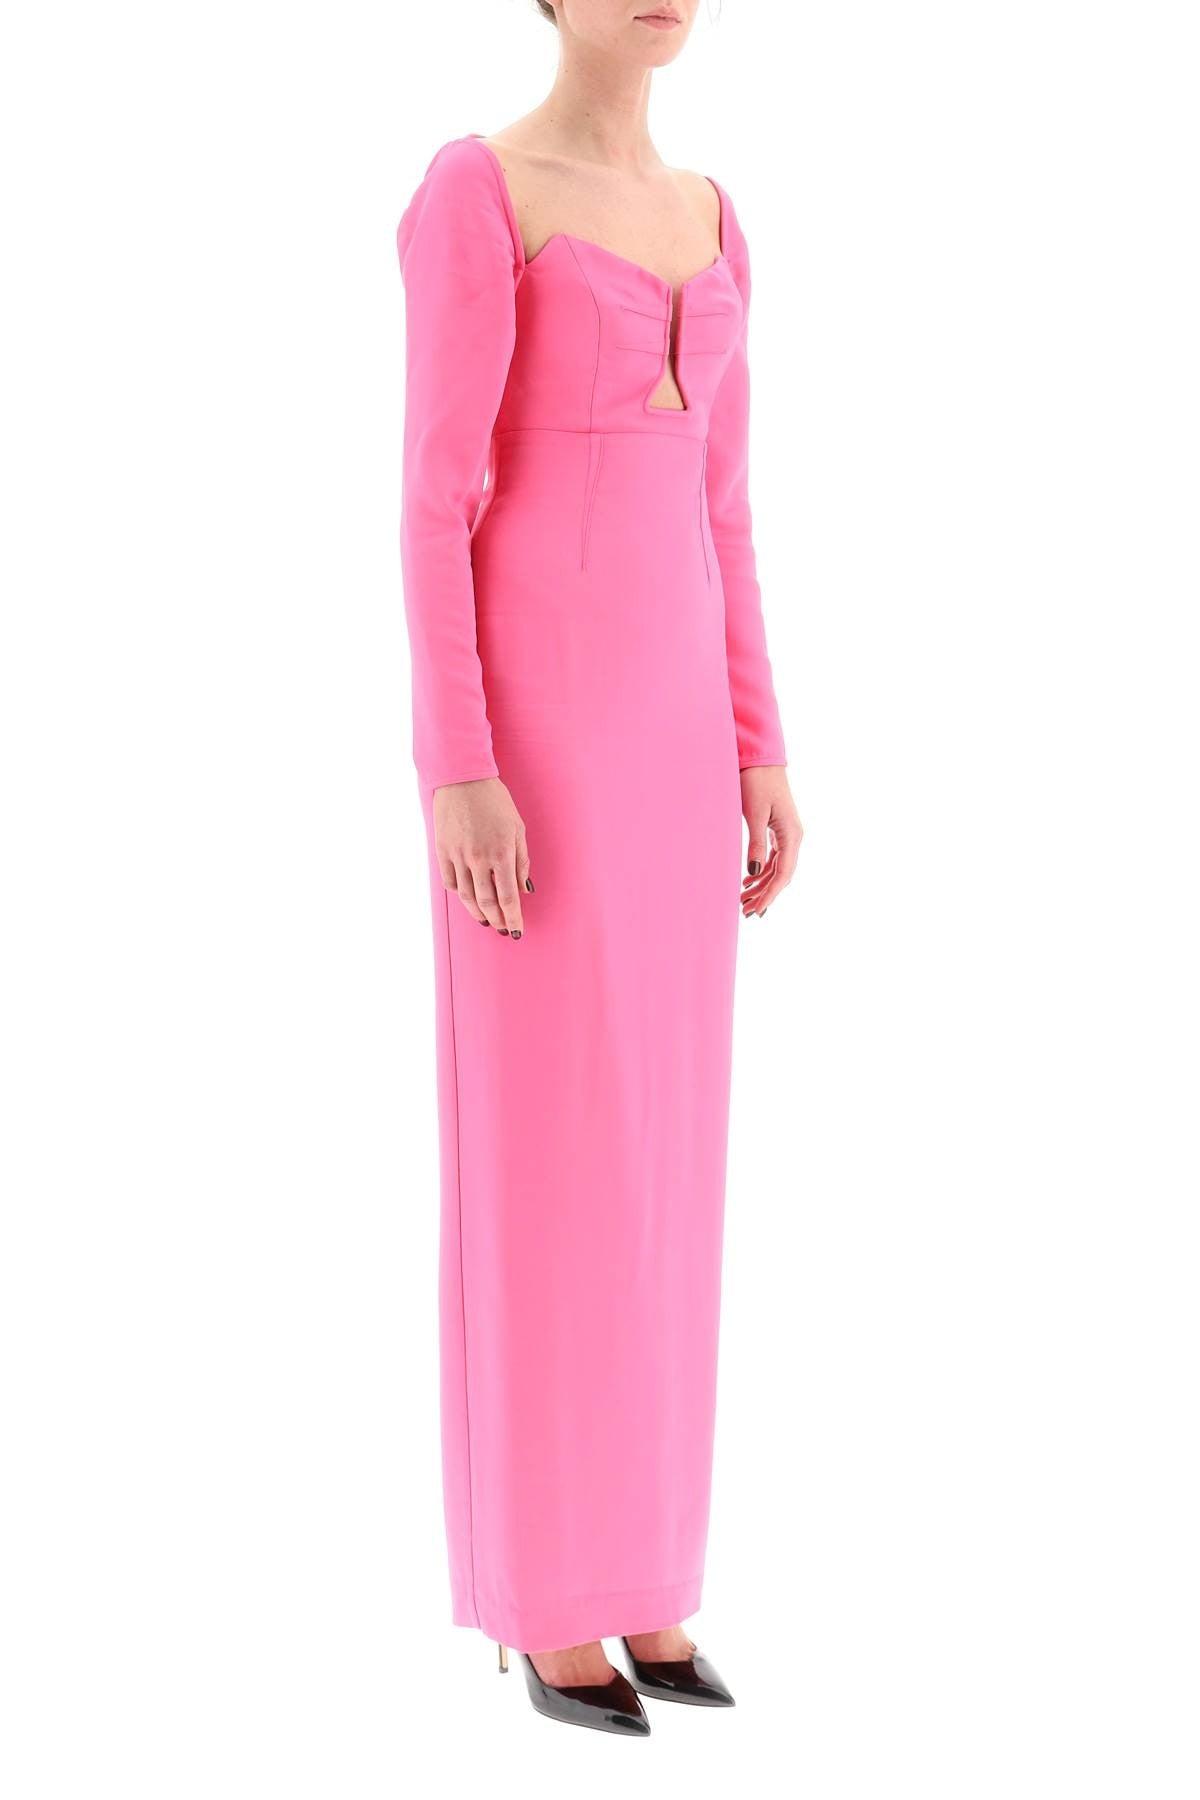 Roland Mouret Maxi Pencil Dress With Cut Outs in Pink | Lyst